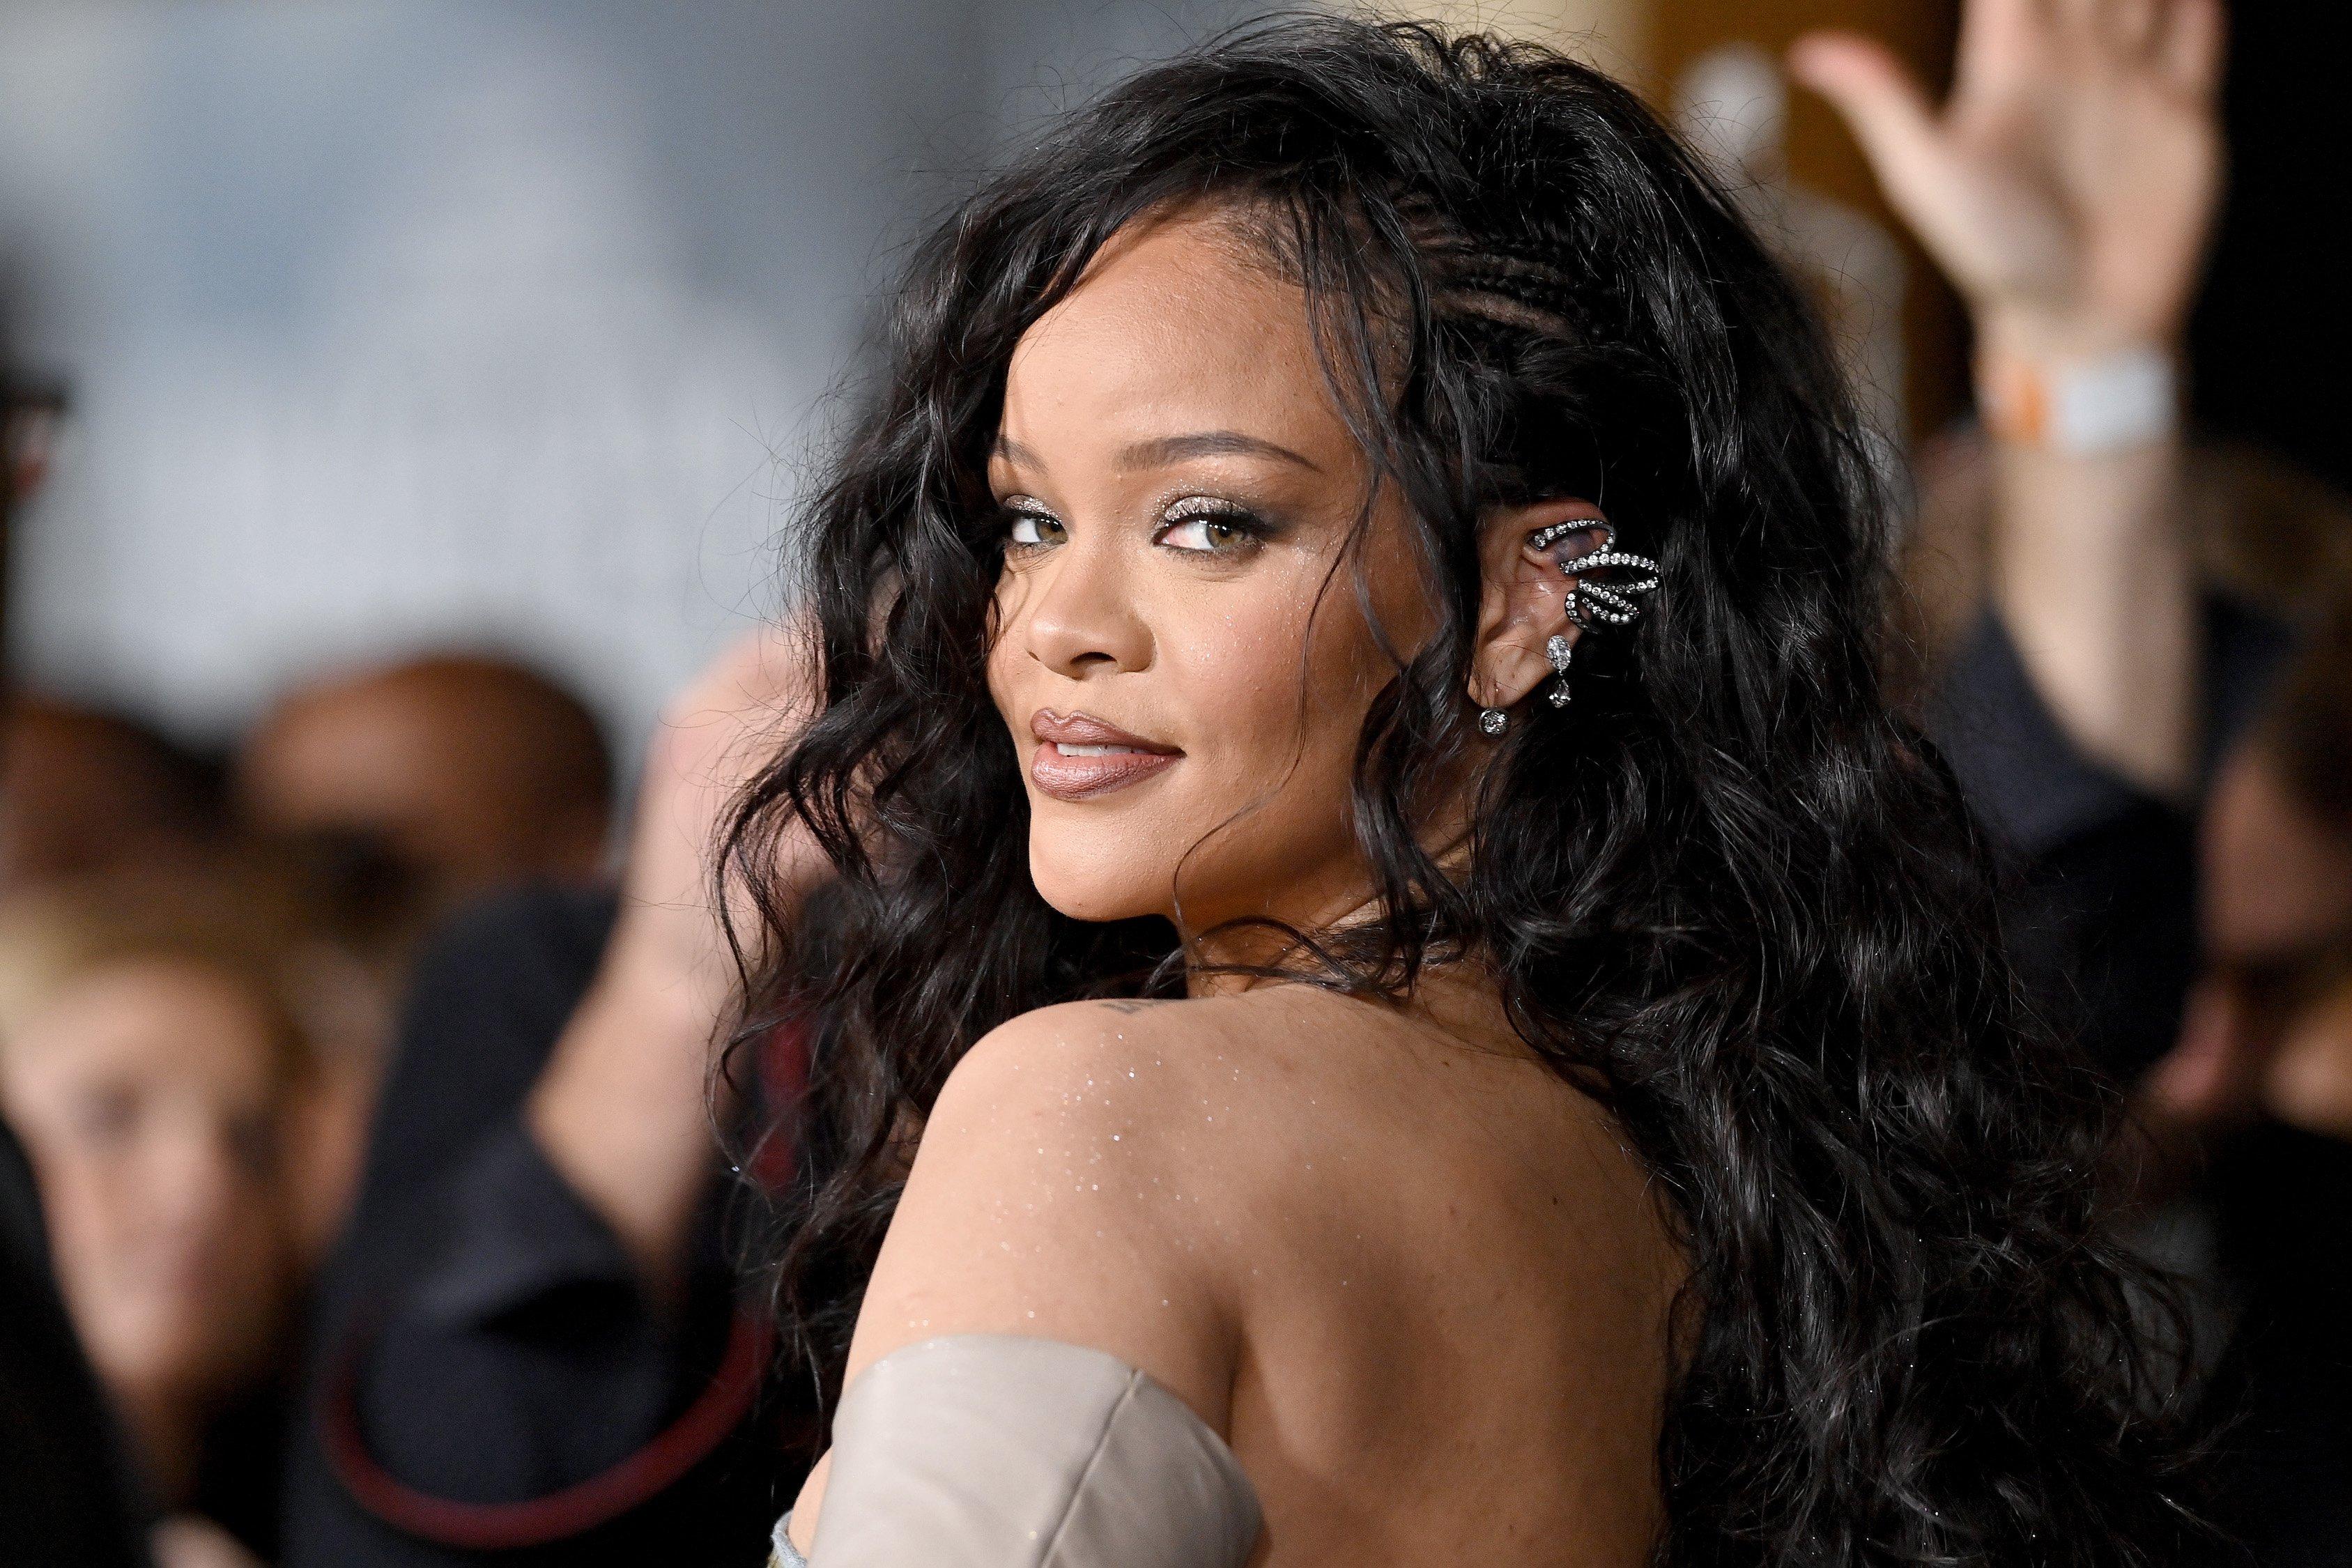 The Rihanna Essentials 15 Singles To Celebrate The Singers Endless Pop Reign pic